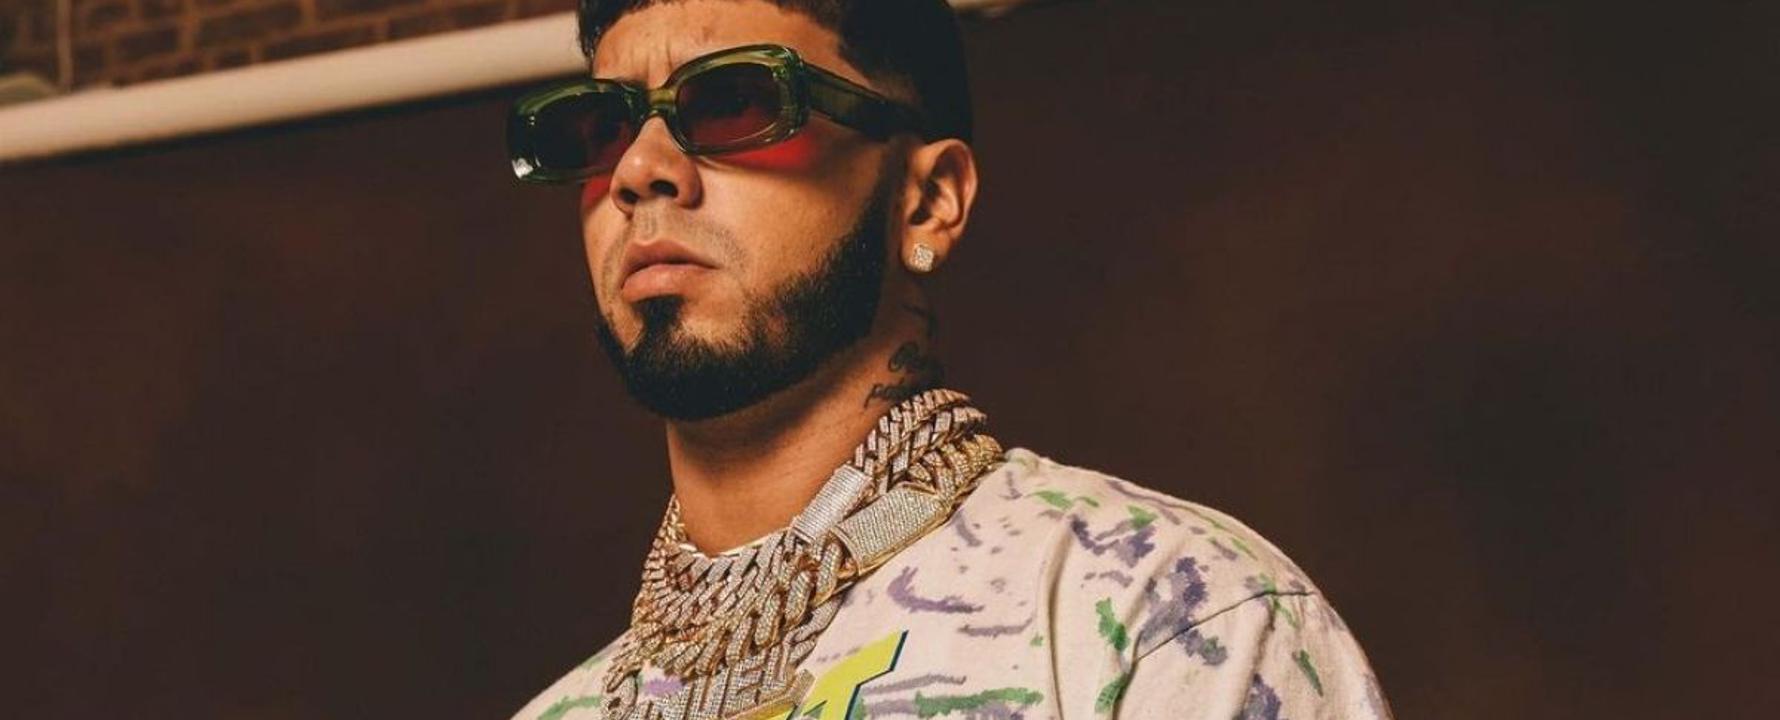 Promotional photograph of Anuel AA.